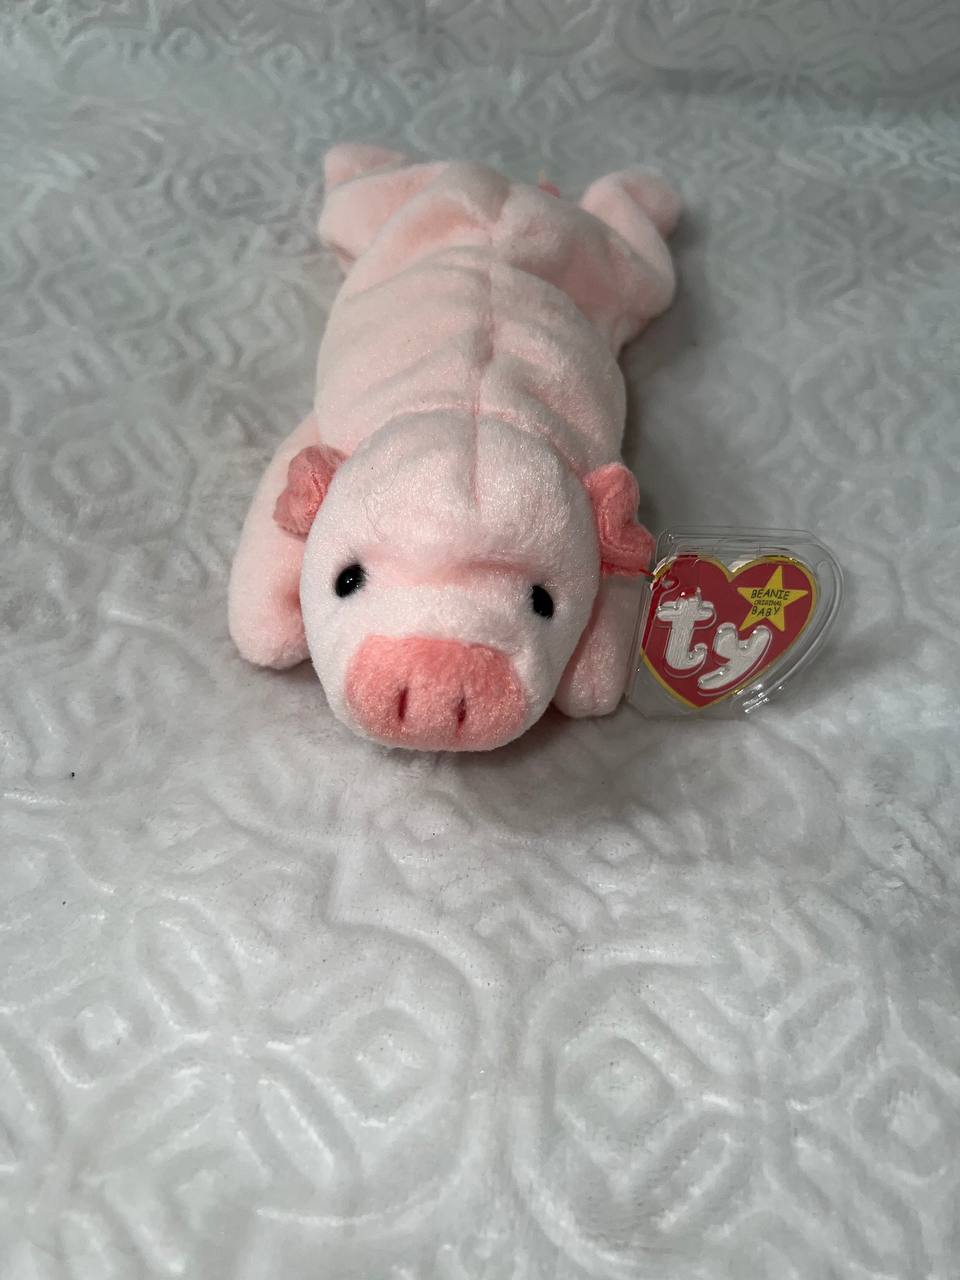 *RARE* MINT Squealer Beanie Baby 1993 With Tag